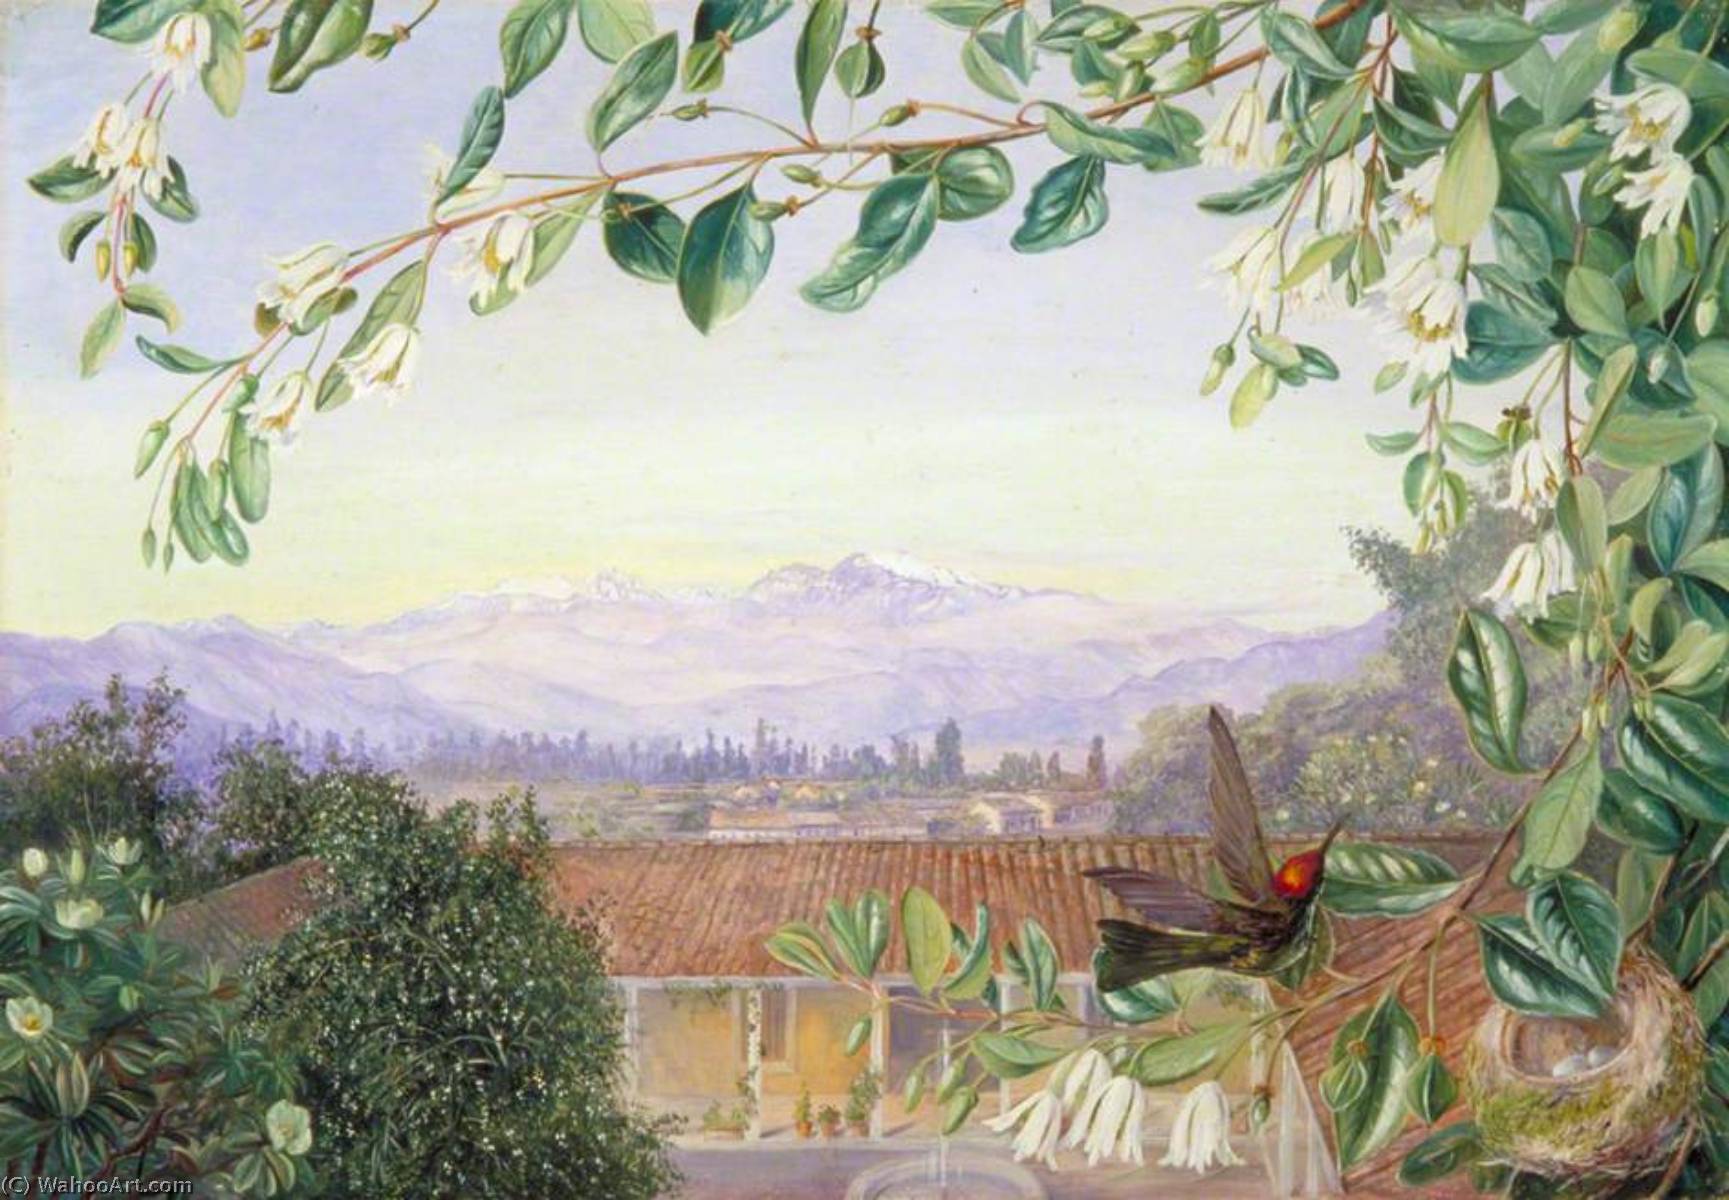 WikiOO.org - 백과 사전 - 회화, 삽화 Marianne North - The Permanent Snows from Santiago Patagua in front with Humming Bird and Nest